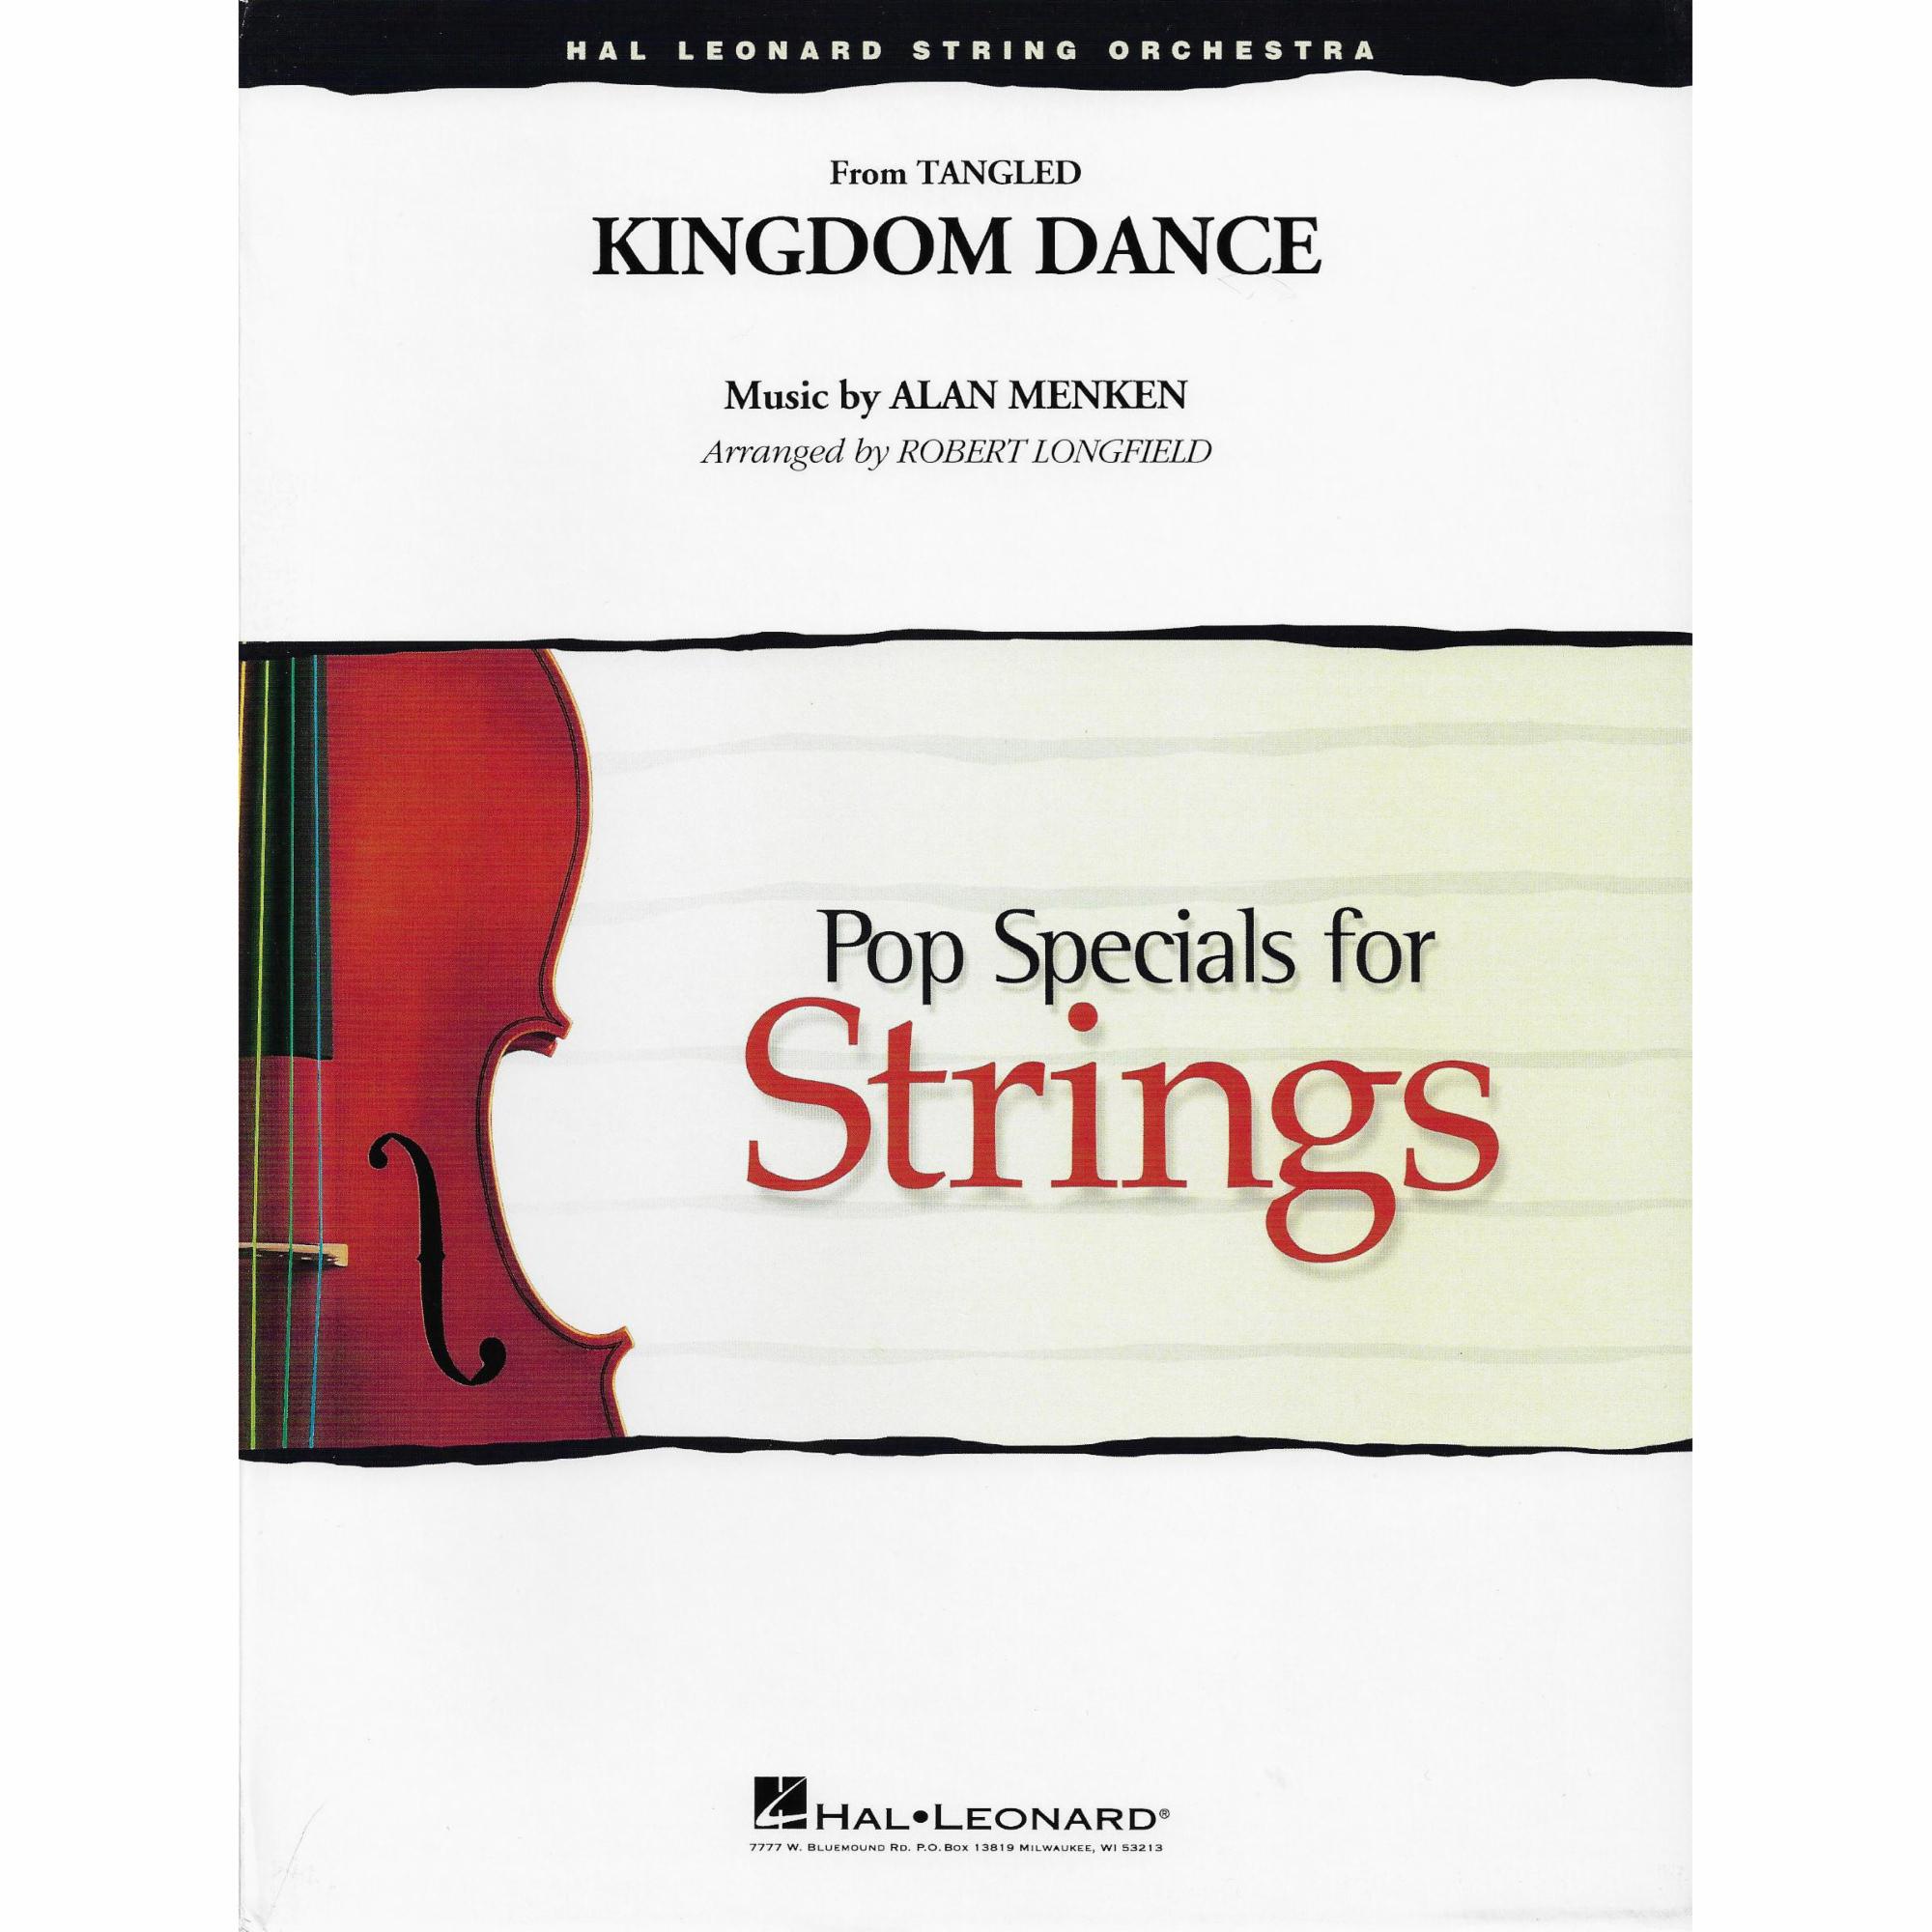 Kingdom Dance, from Tangled for String Orchestra